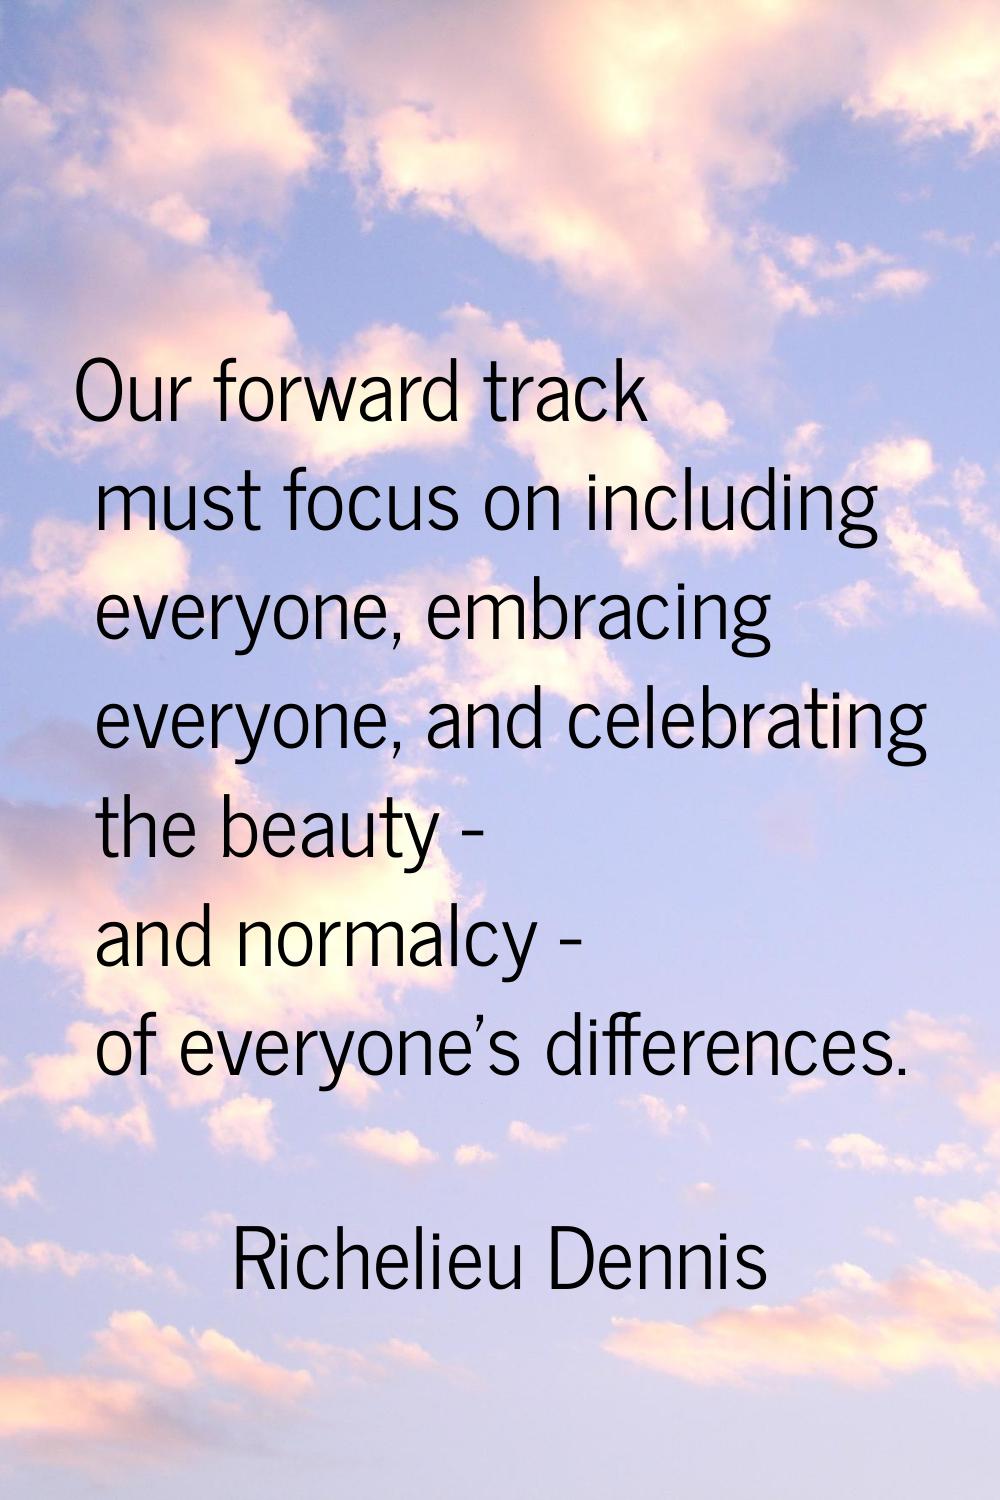 Our forward track must focus on including everyone, embracing everyone, and celebrating the beauty 